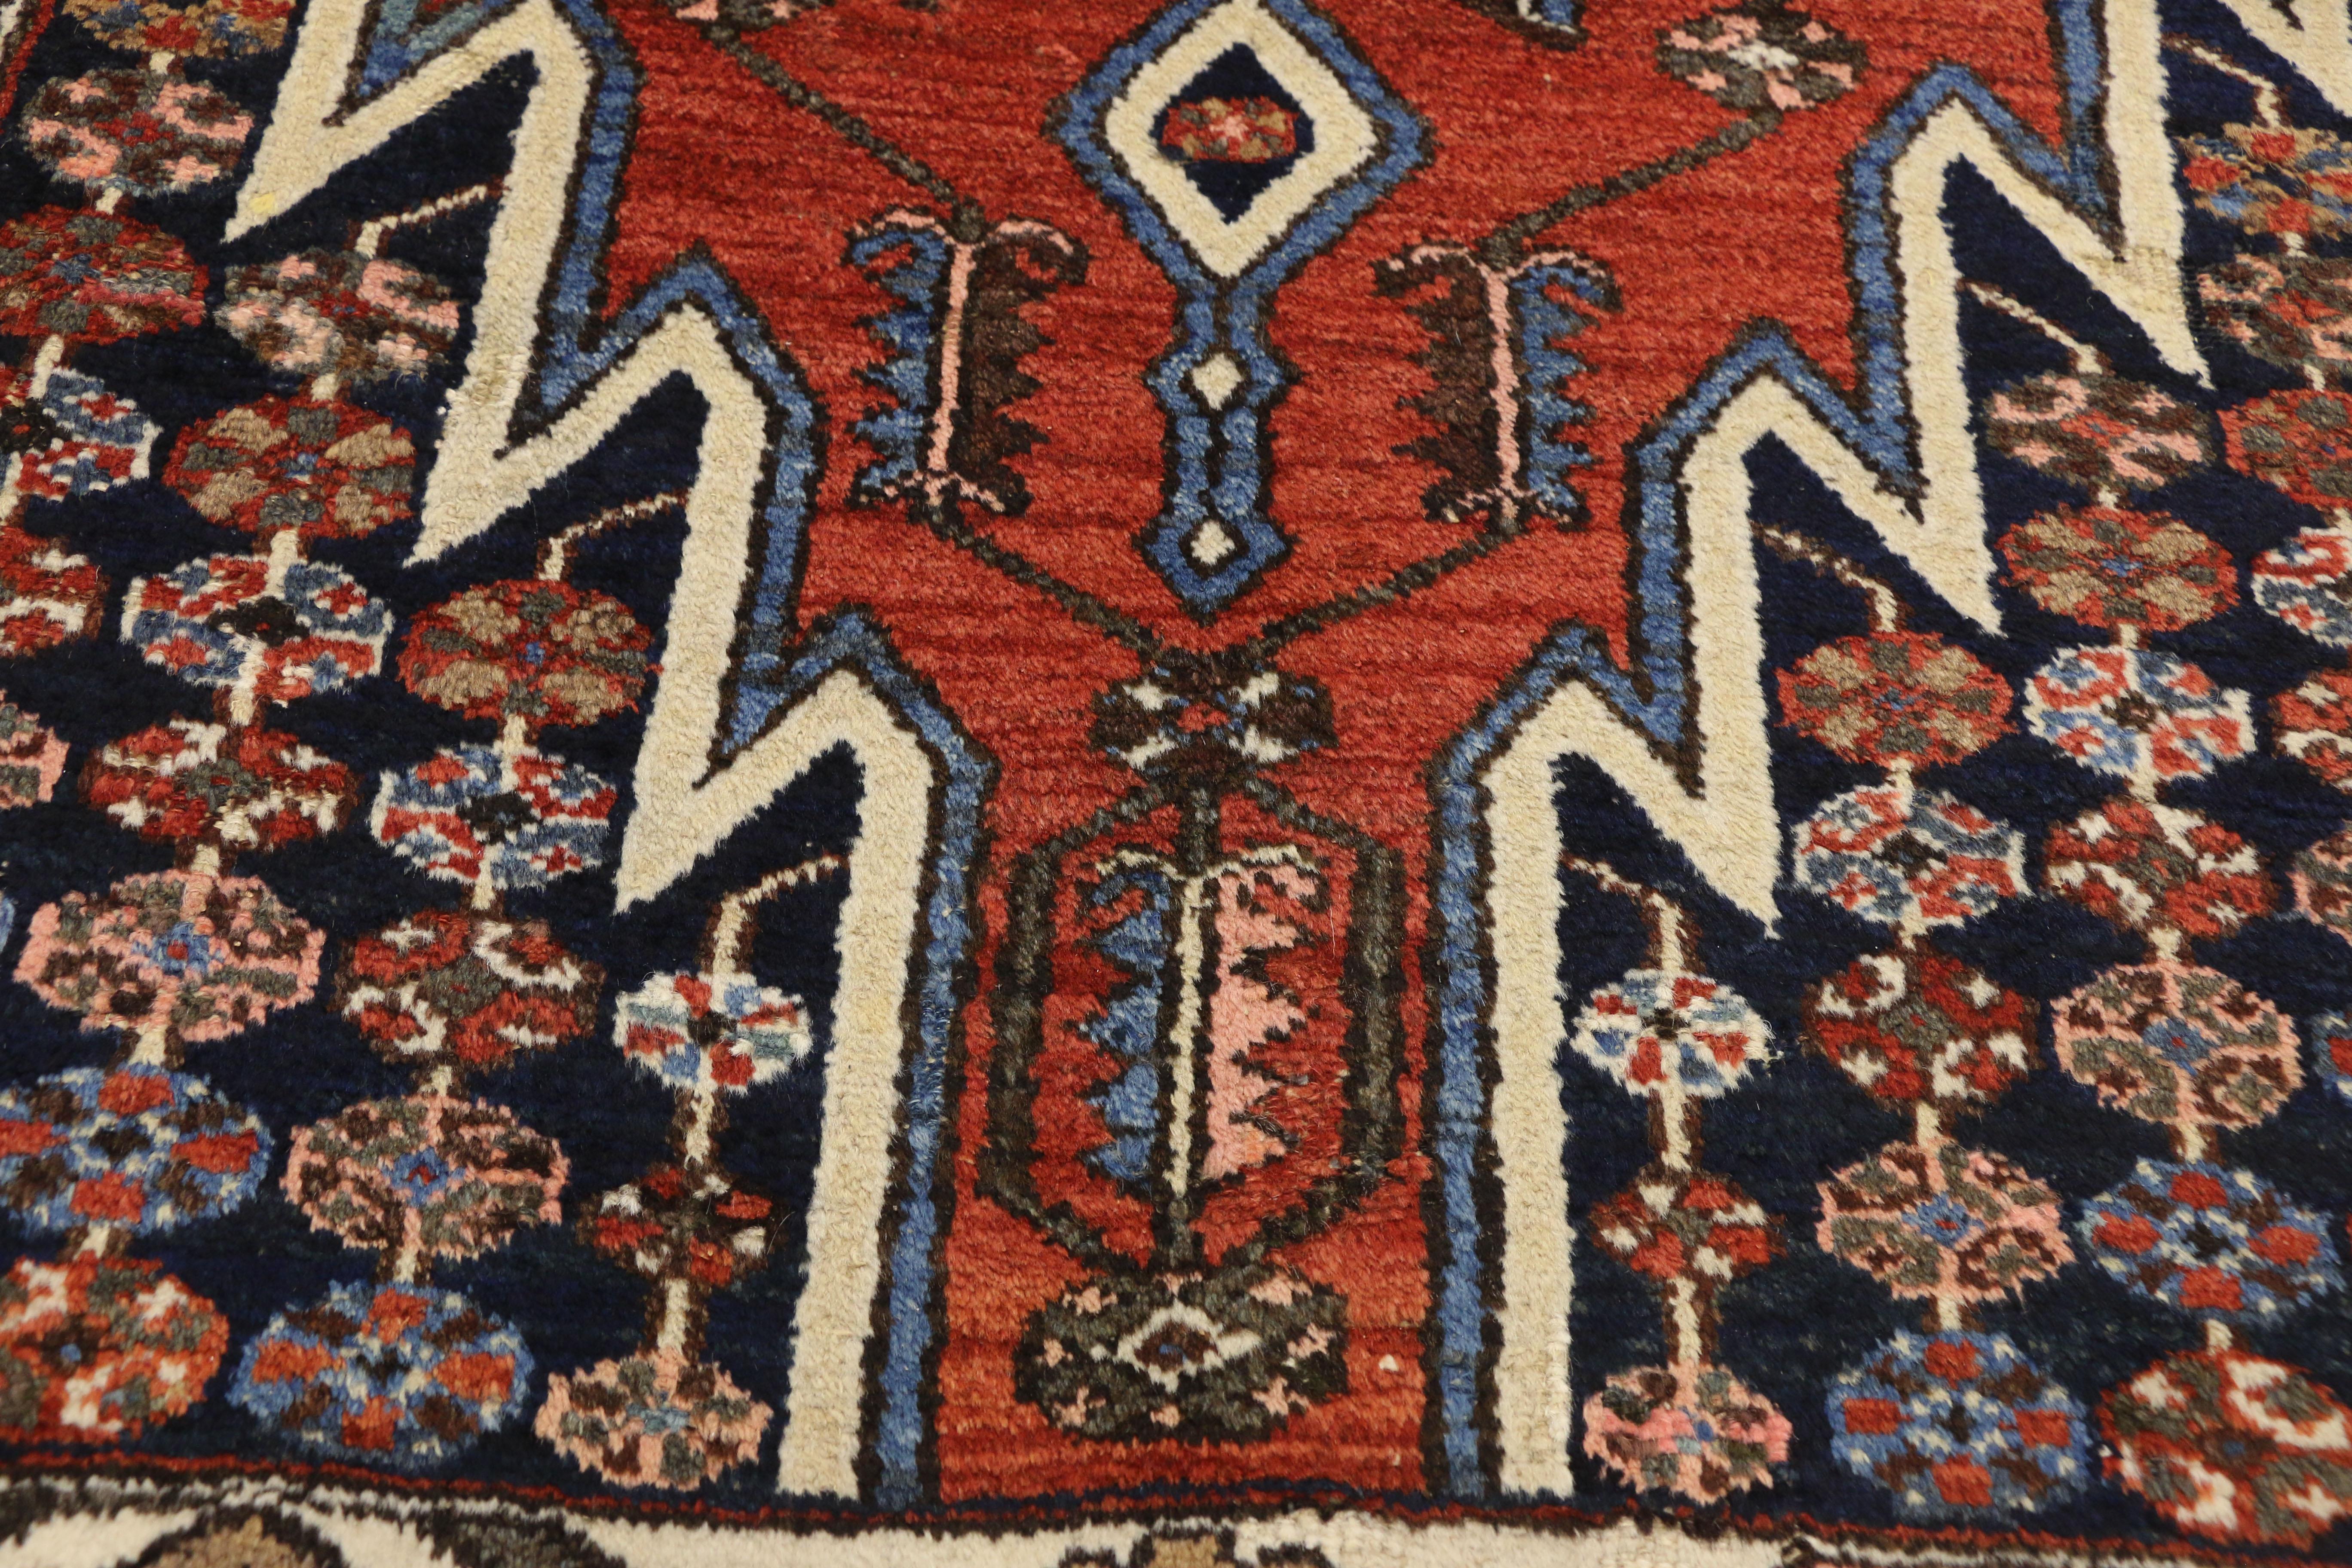 Antique Persian Mazlaghan Hamadan Rug with Modern Tribal Style In Good Condition For Sale In Dallas, TX